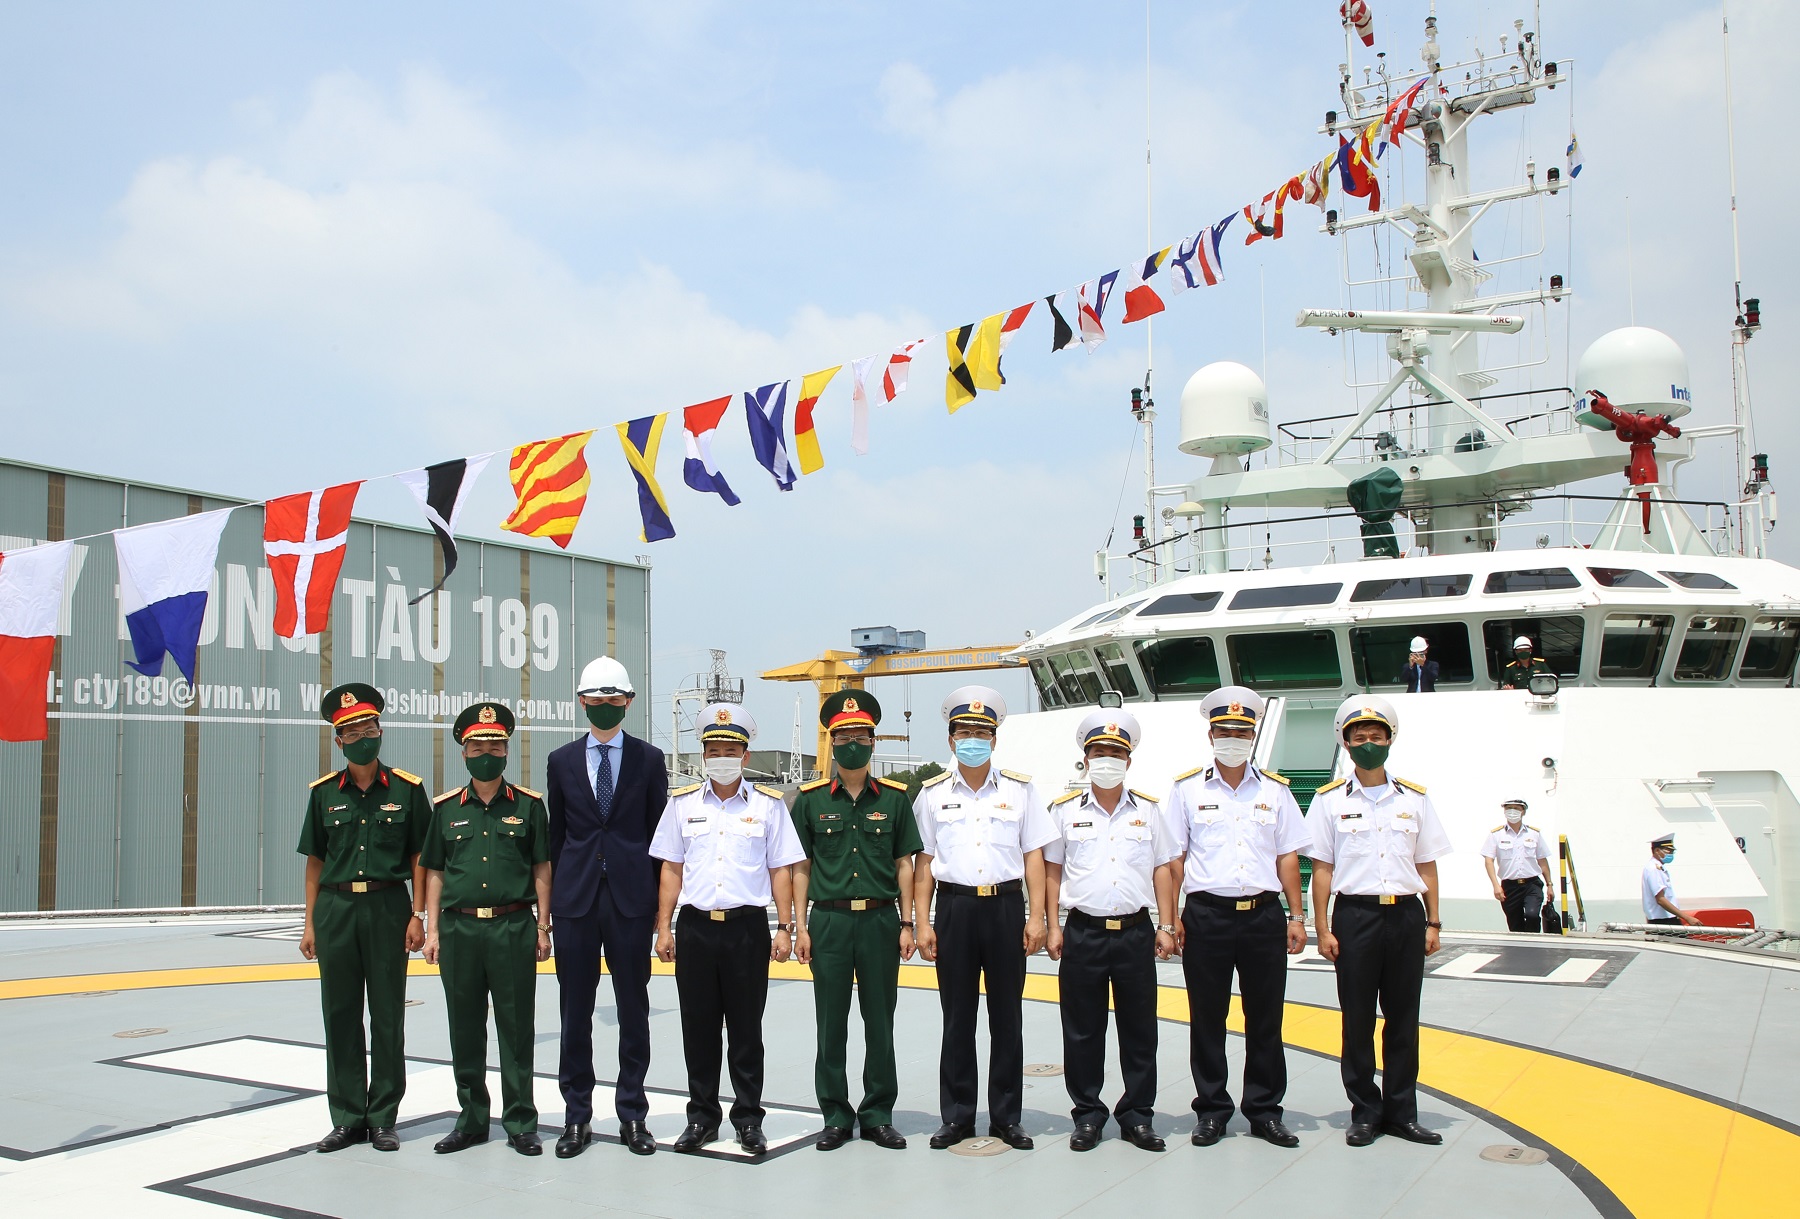 Vietnam People's Navy Commissioned Multipurpose Submarine Search and Rescue Ship (MSSARS) Y?t Kiêu